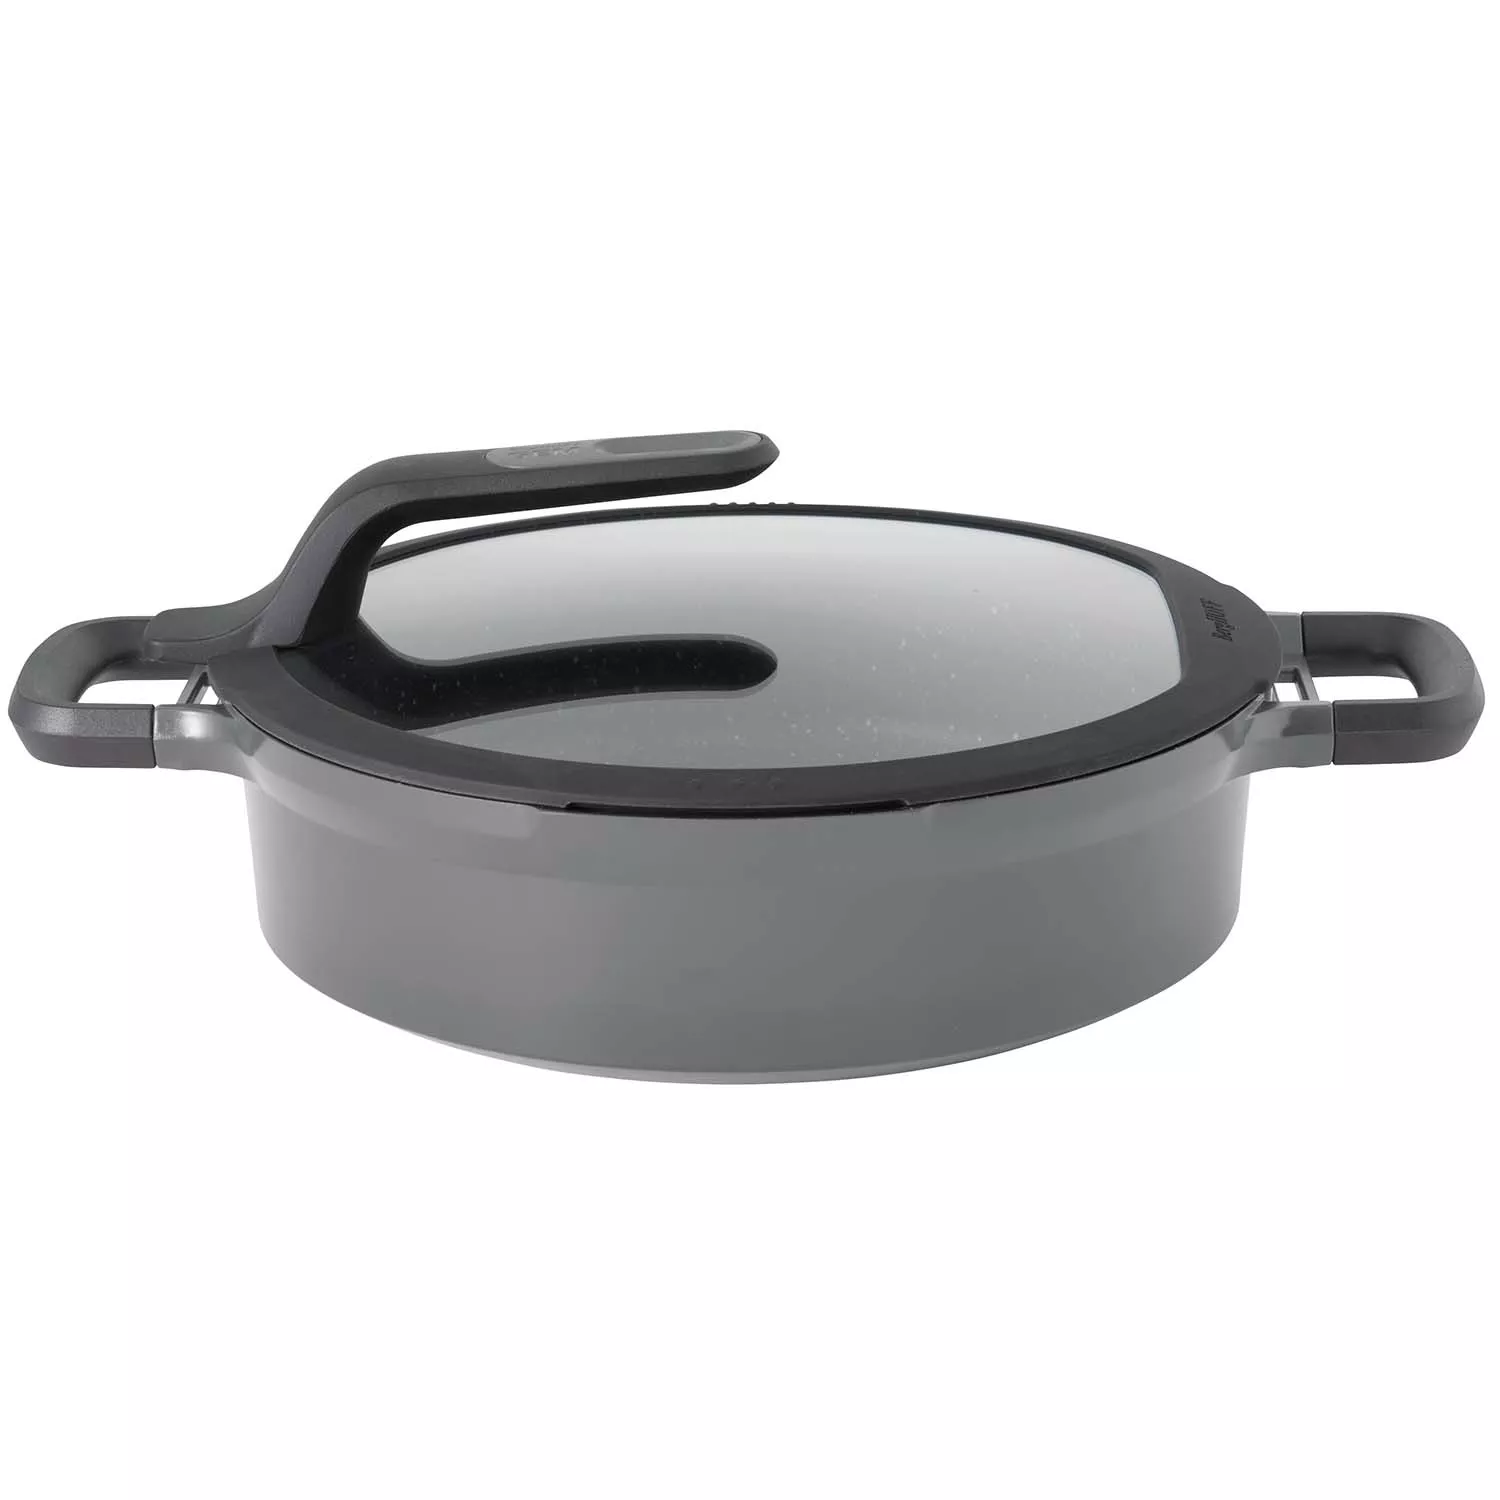 BergHOFF Gem Stay-Cool Double-Handled Sauté Pans With Lid